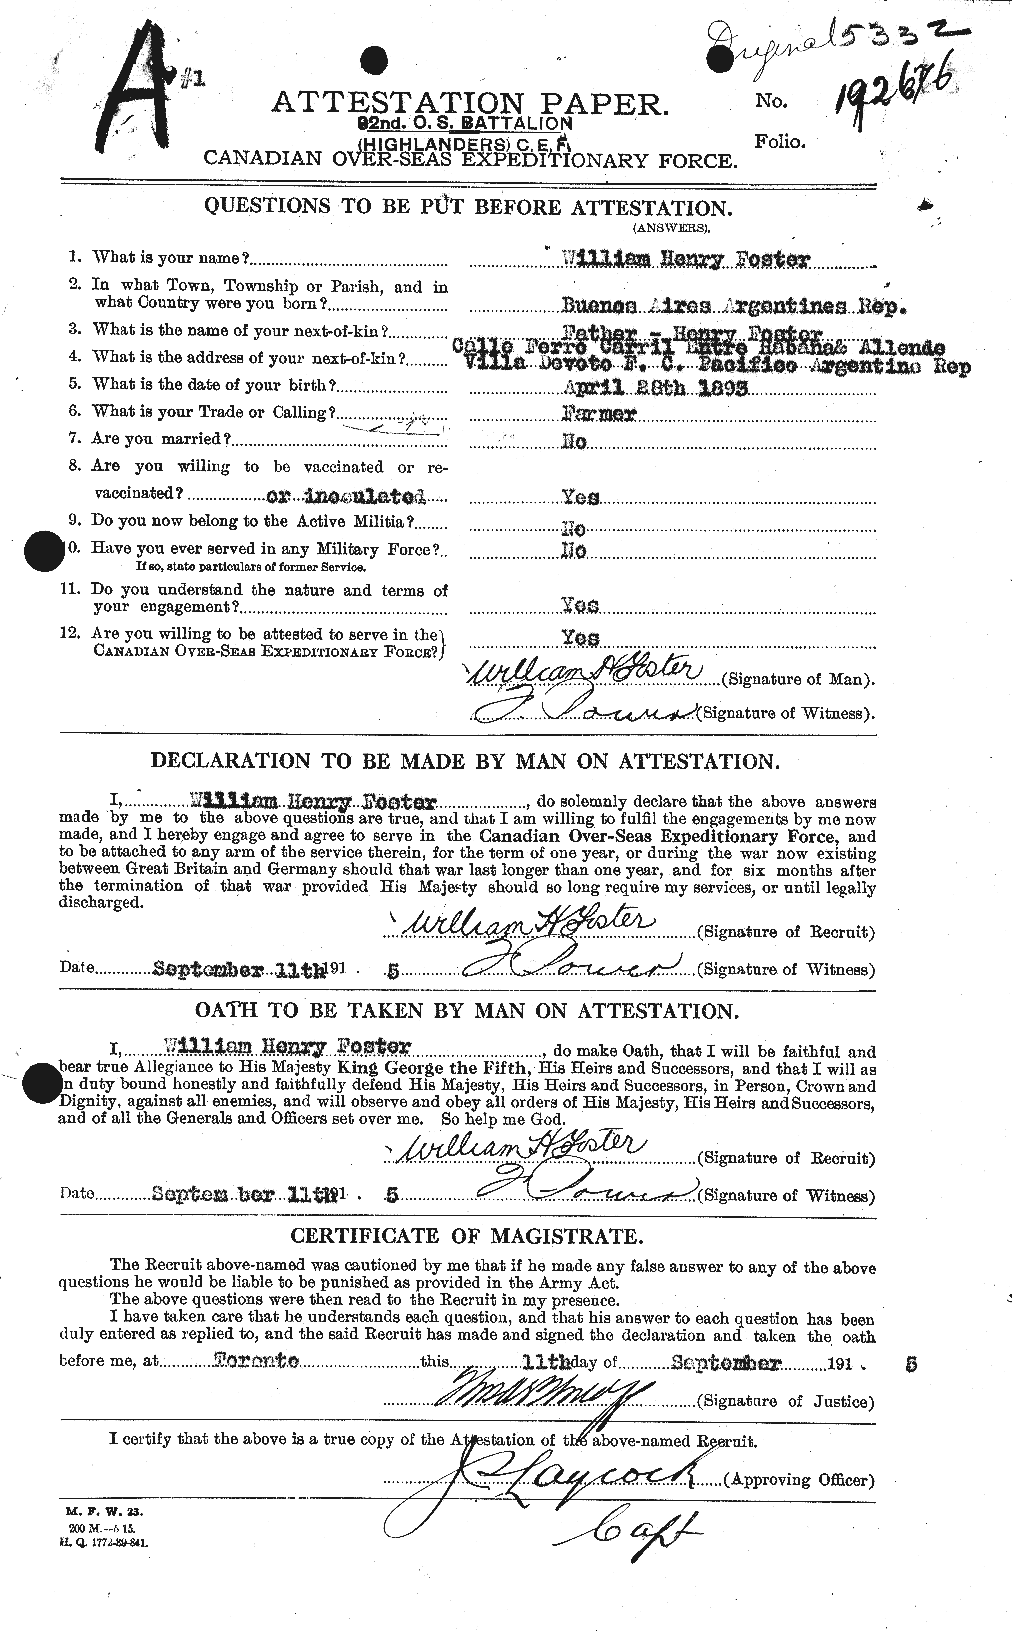 Personnel Records of the First World War - CEF 328754a